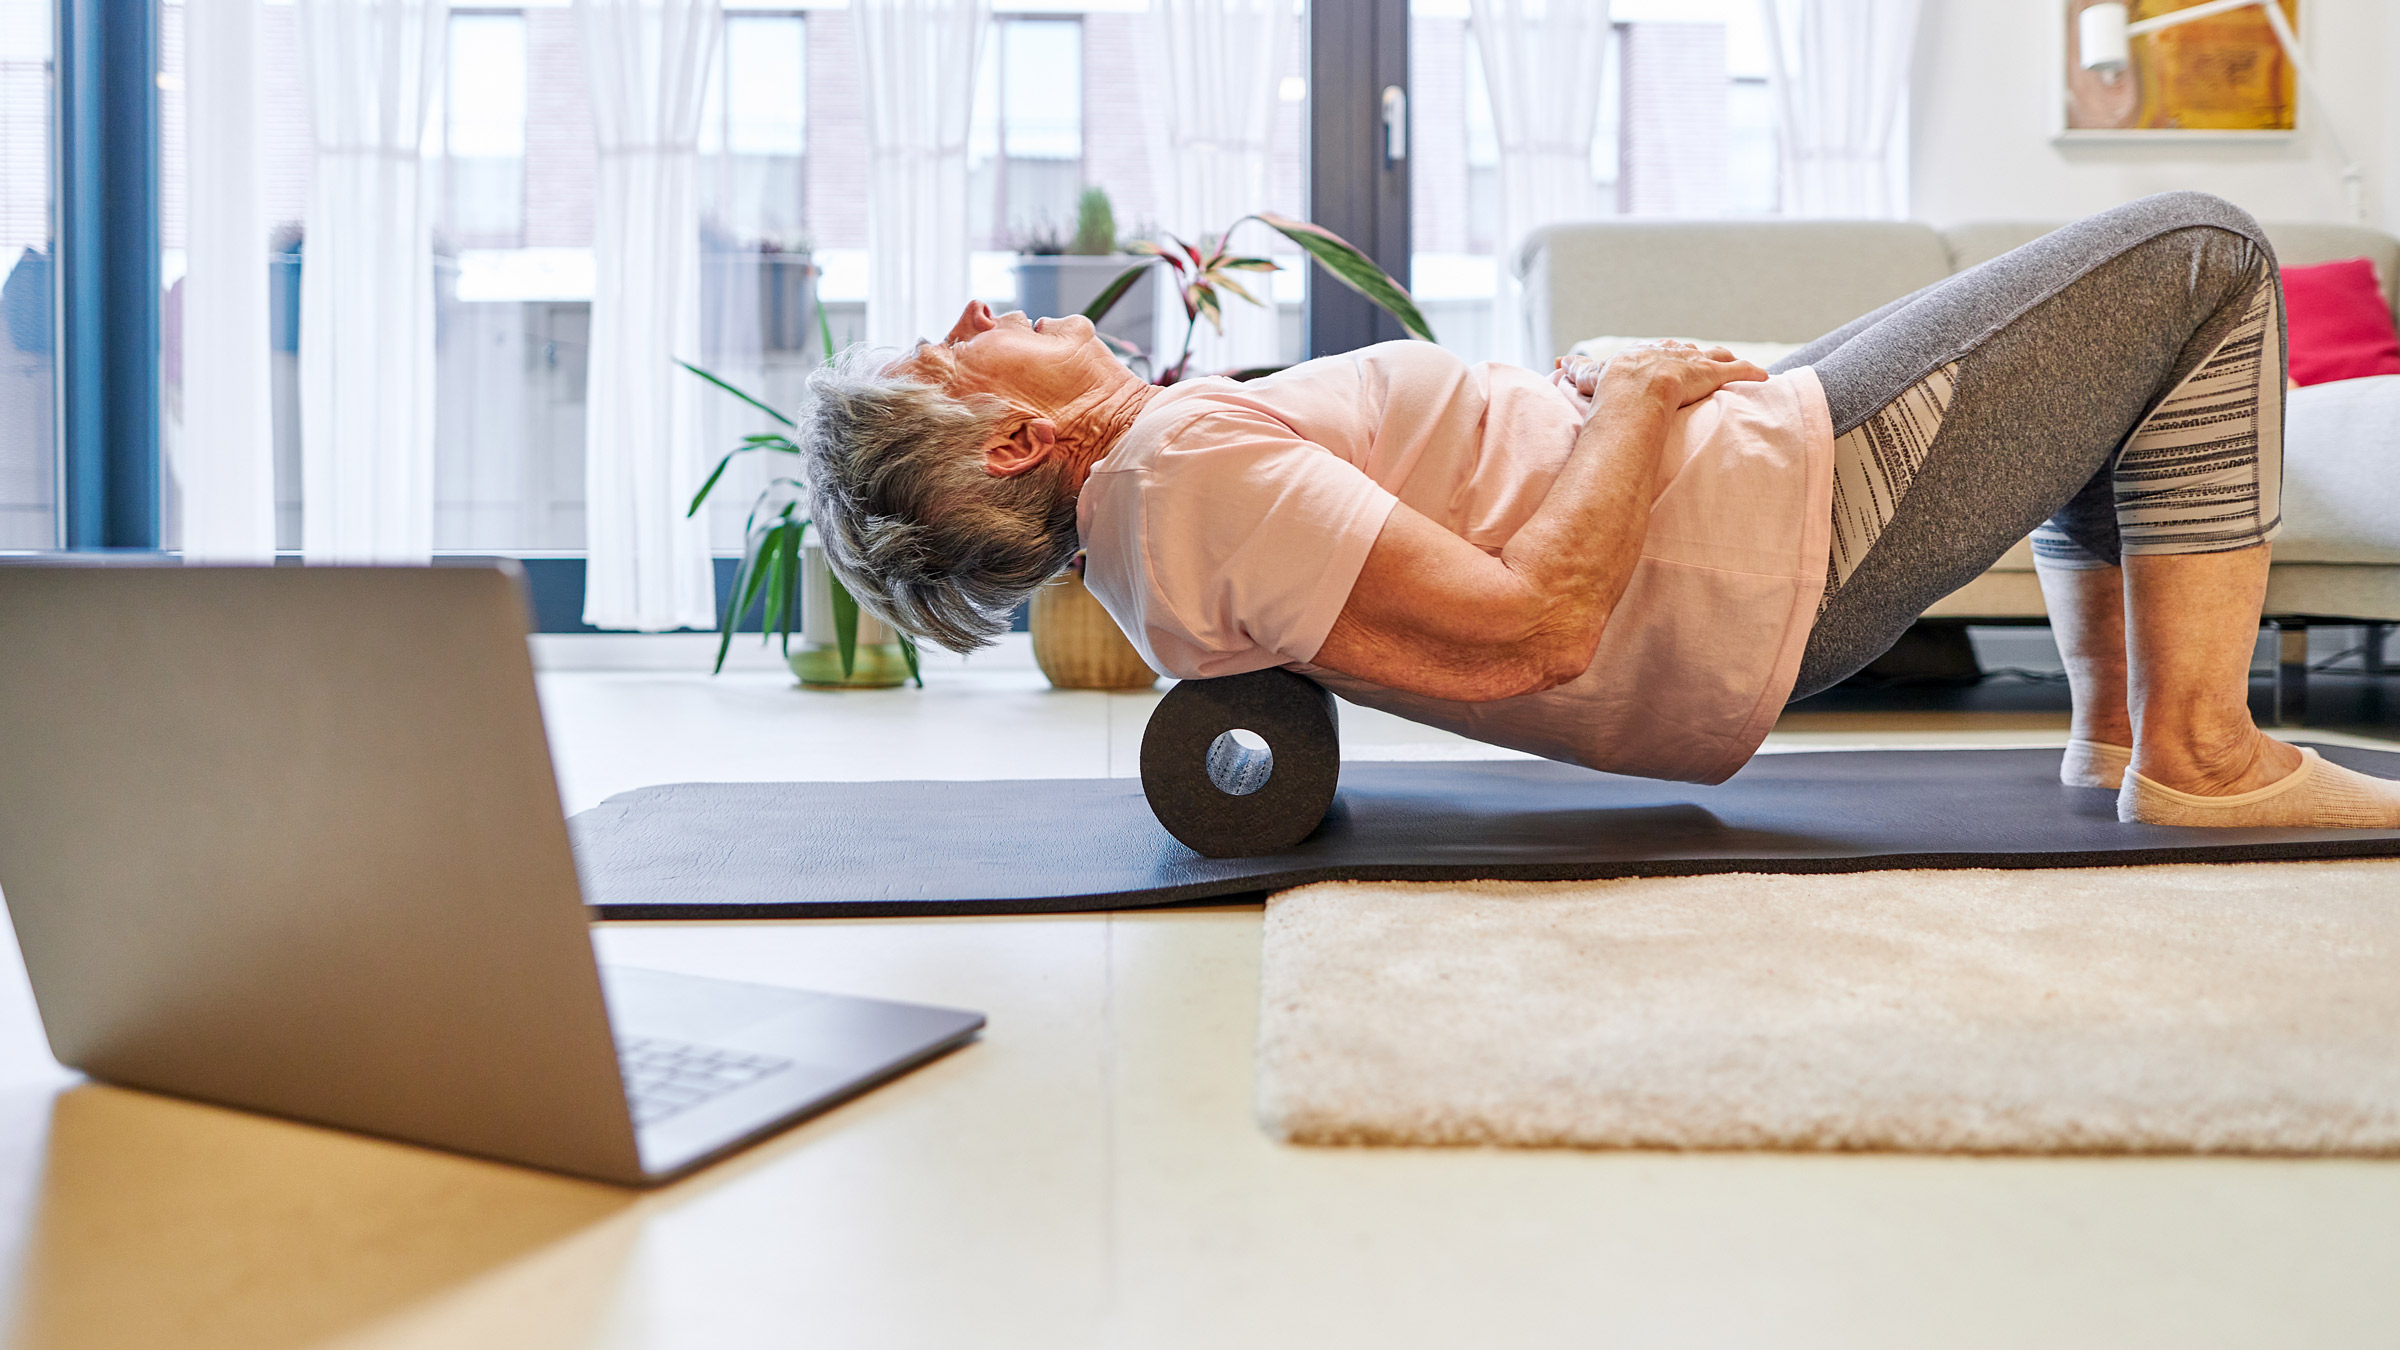 Should You Foam Roll Your IT Band? Here's What a PT Wants You To Know